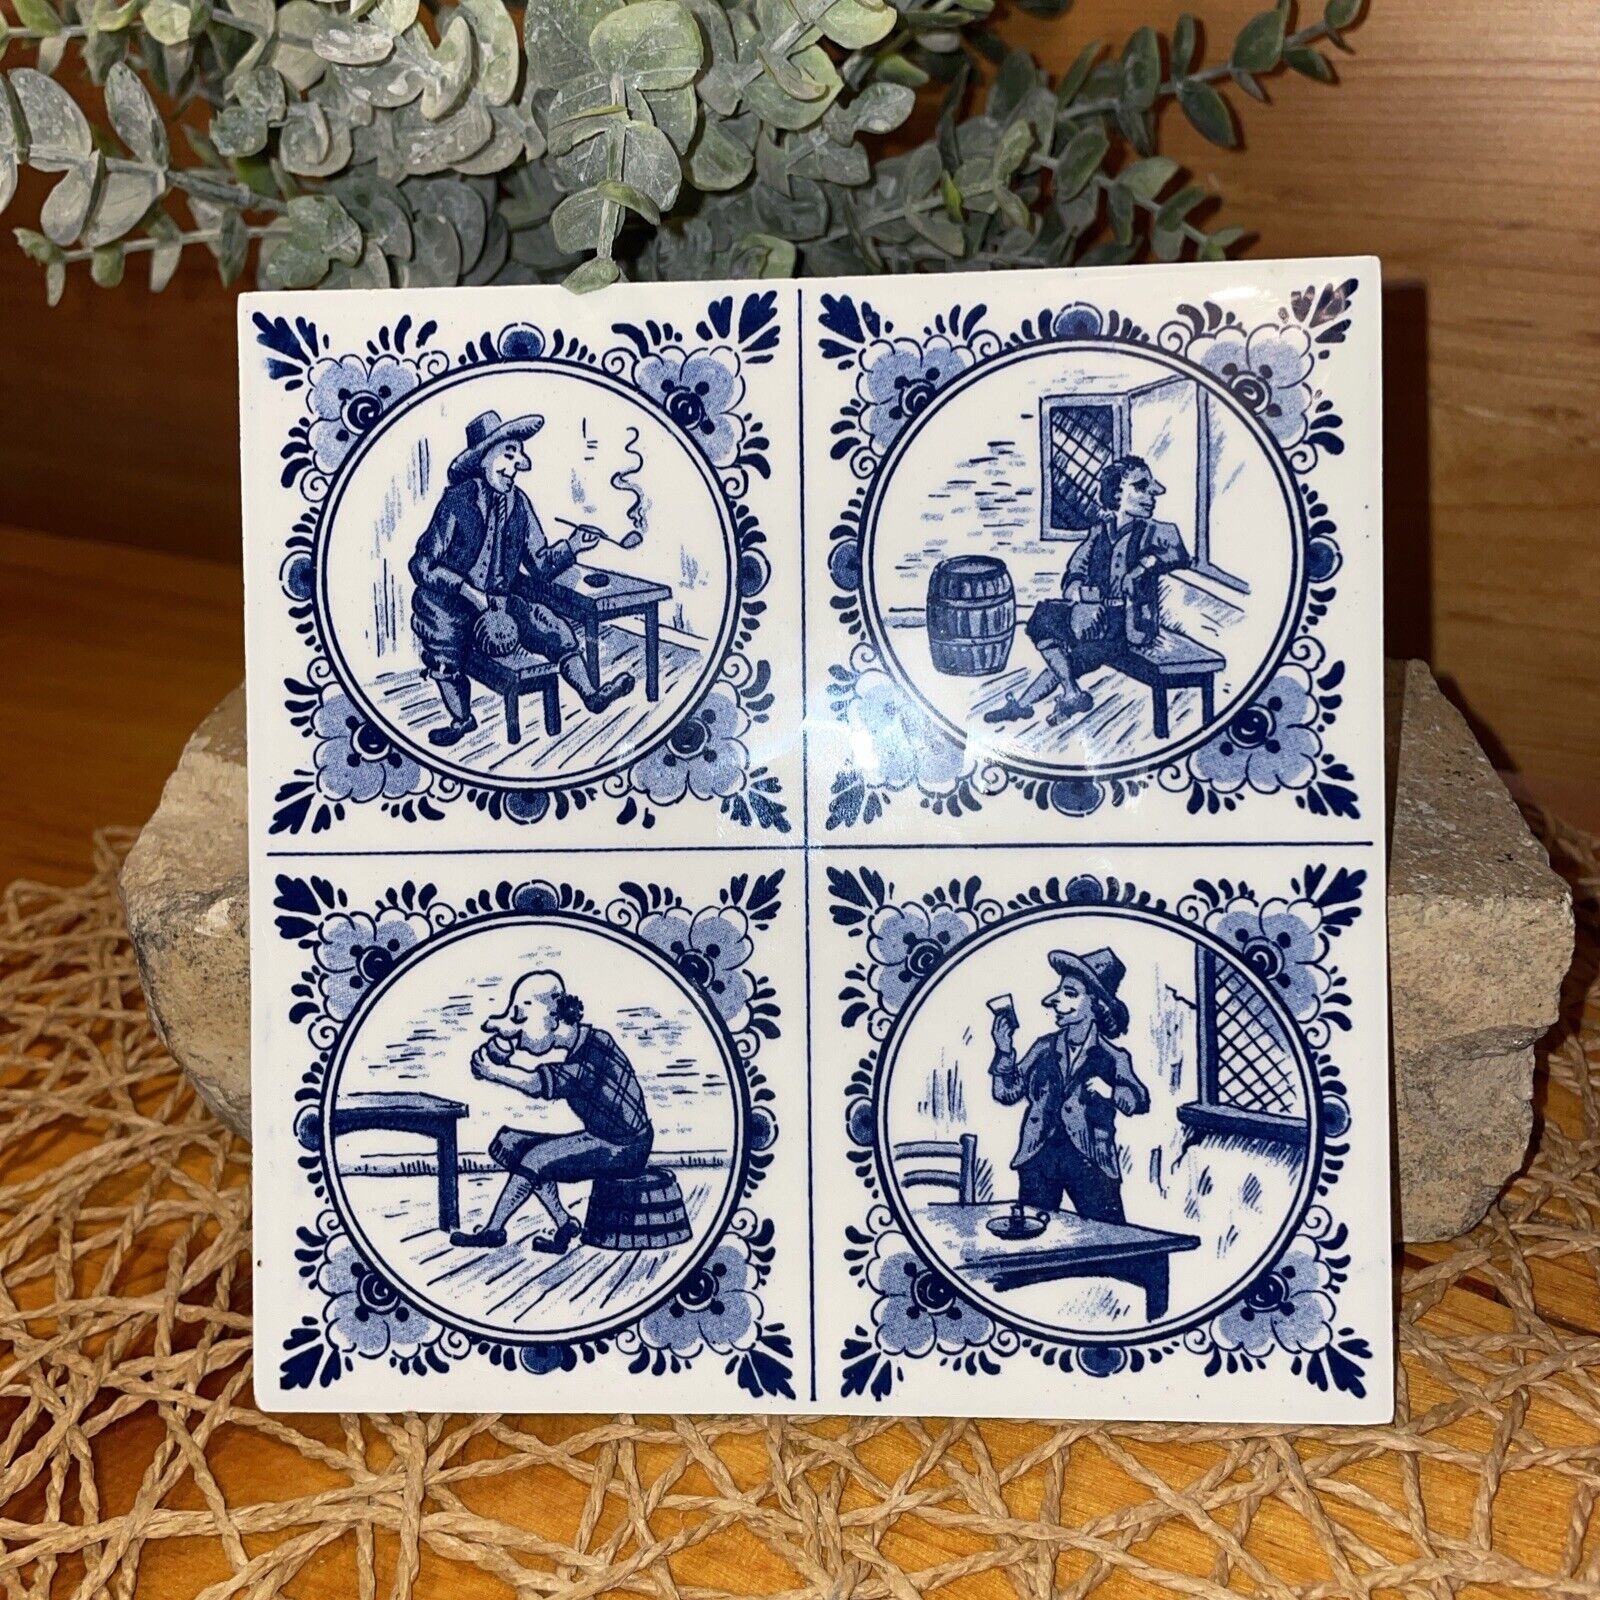 Vintage Delft Hand-Painted Cobalt Blue and White 6 Inch Square Tile 4 Scenes